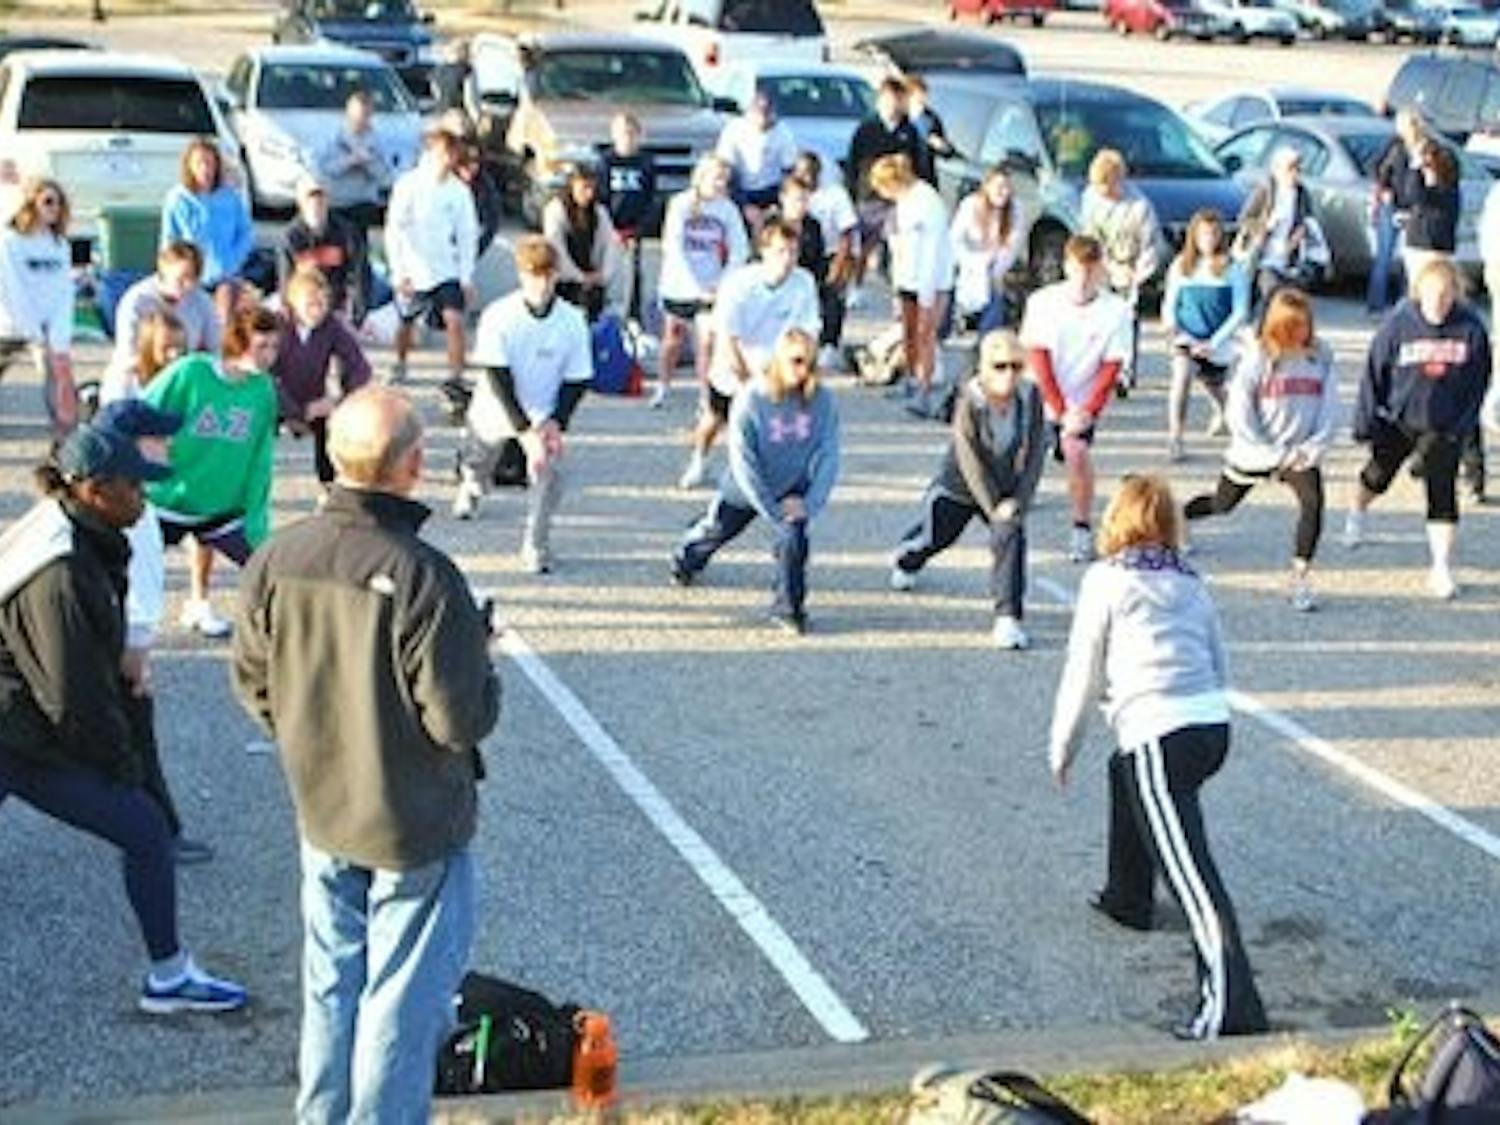 Participants in the 2010 Hunger March, led by the Committee of 19, stretch to prepare for their first day of walking. (Contributed)